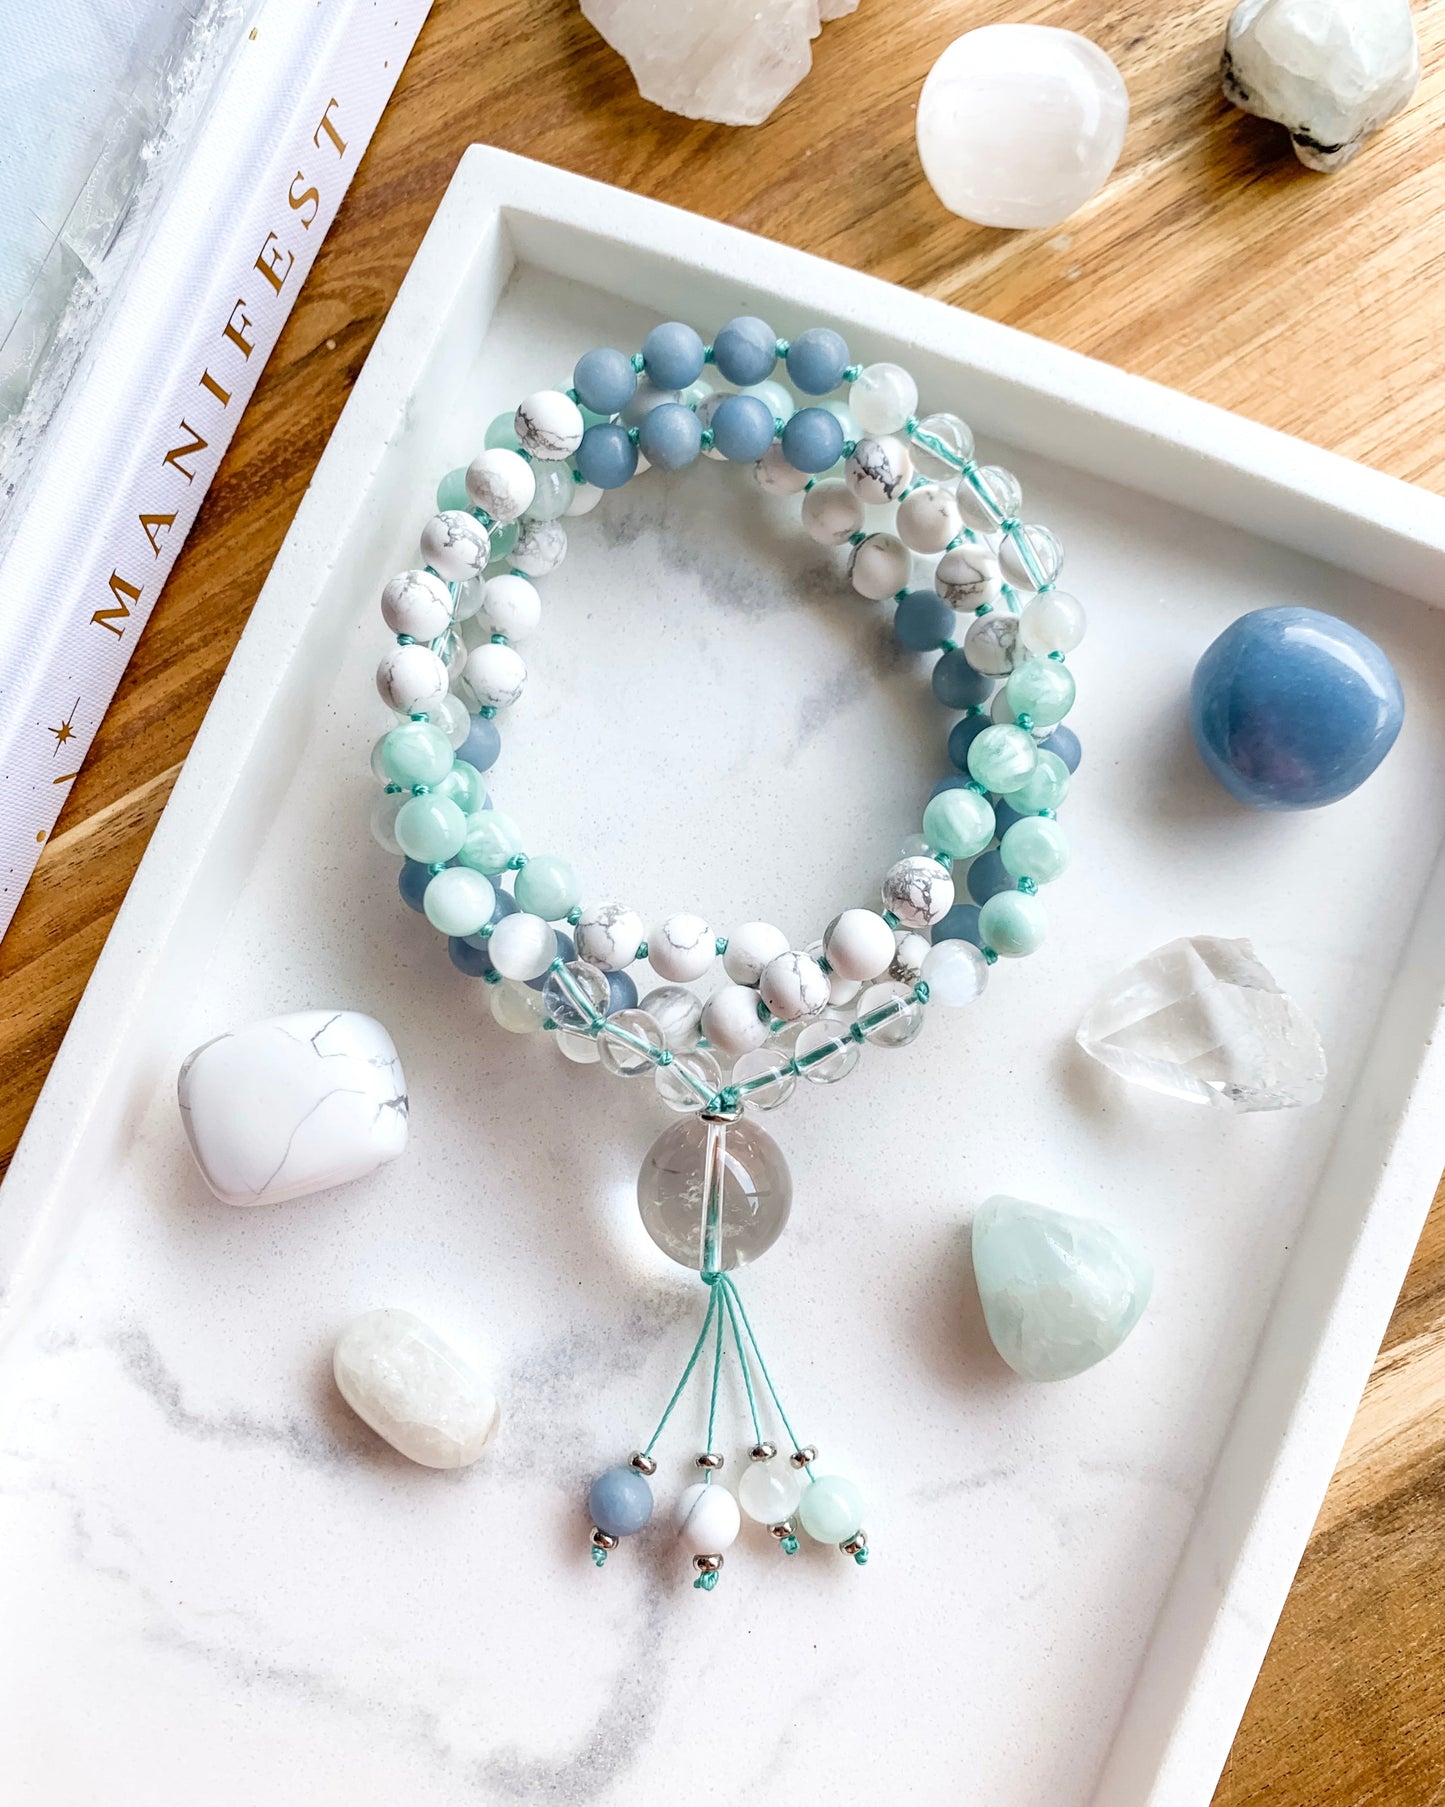 TRANQUIL WATERS Mala Necklace | Angelite, Clear Quartz, Moonstone, Selenite + White Howlite